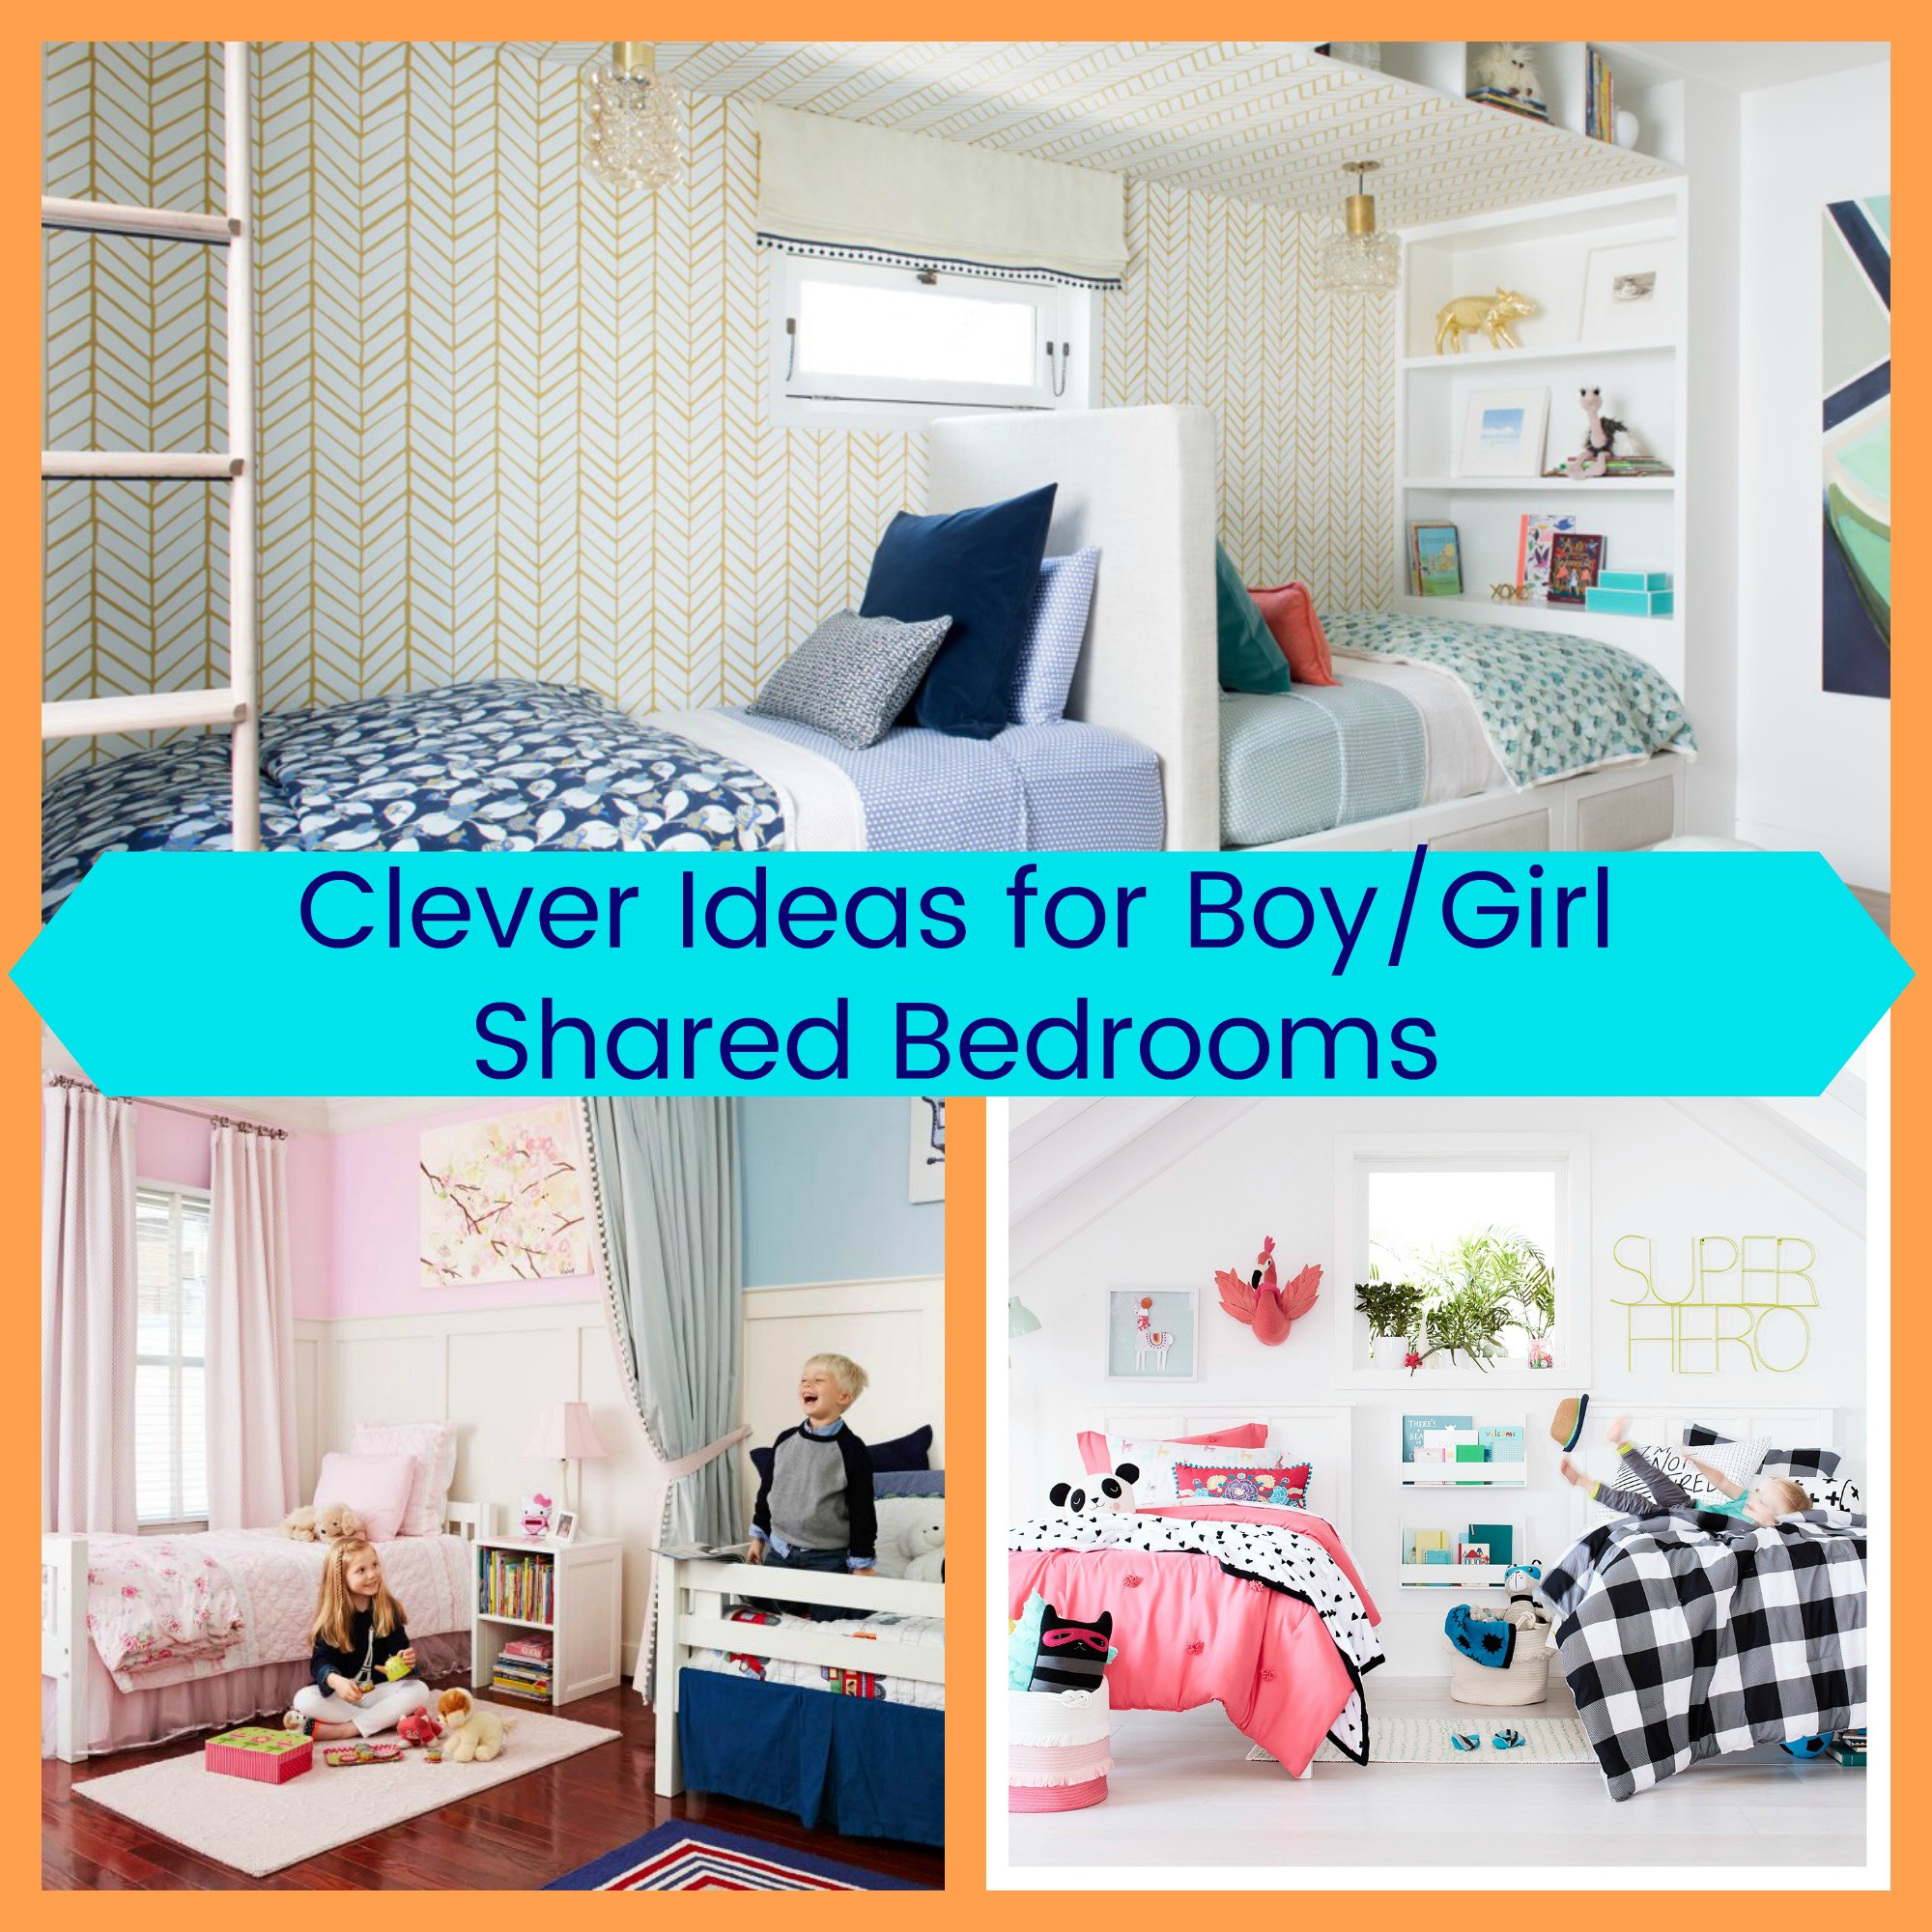 Boy Girl Bedroom Ideas
 Clever Ideas for Boy Girl d Bedrooms The Organized Mom